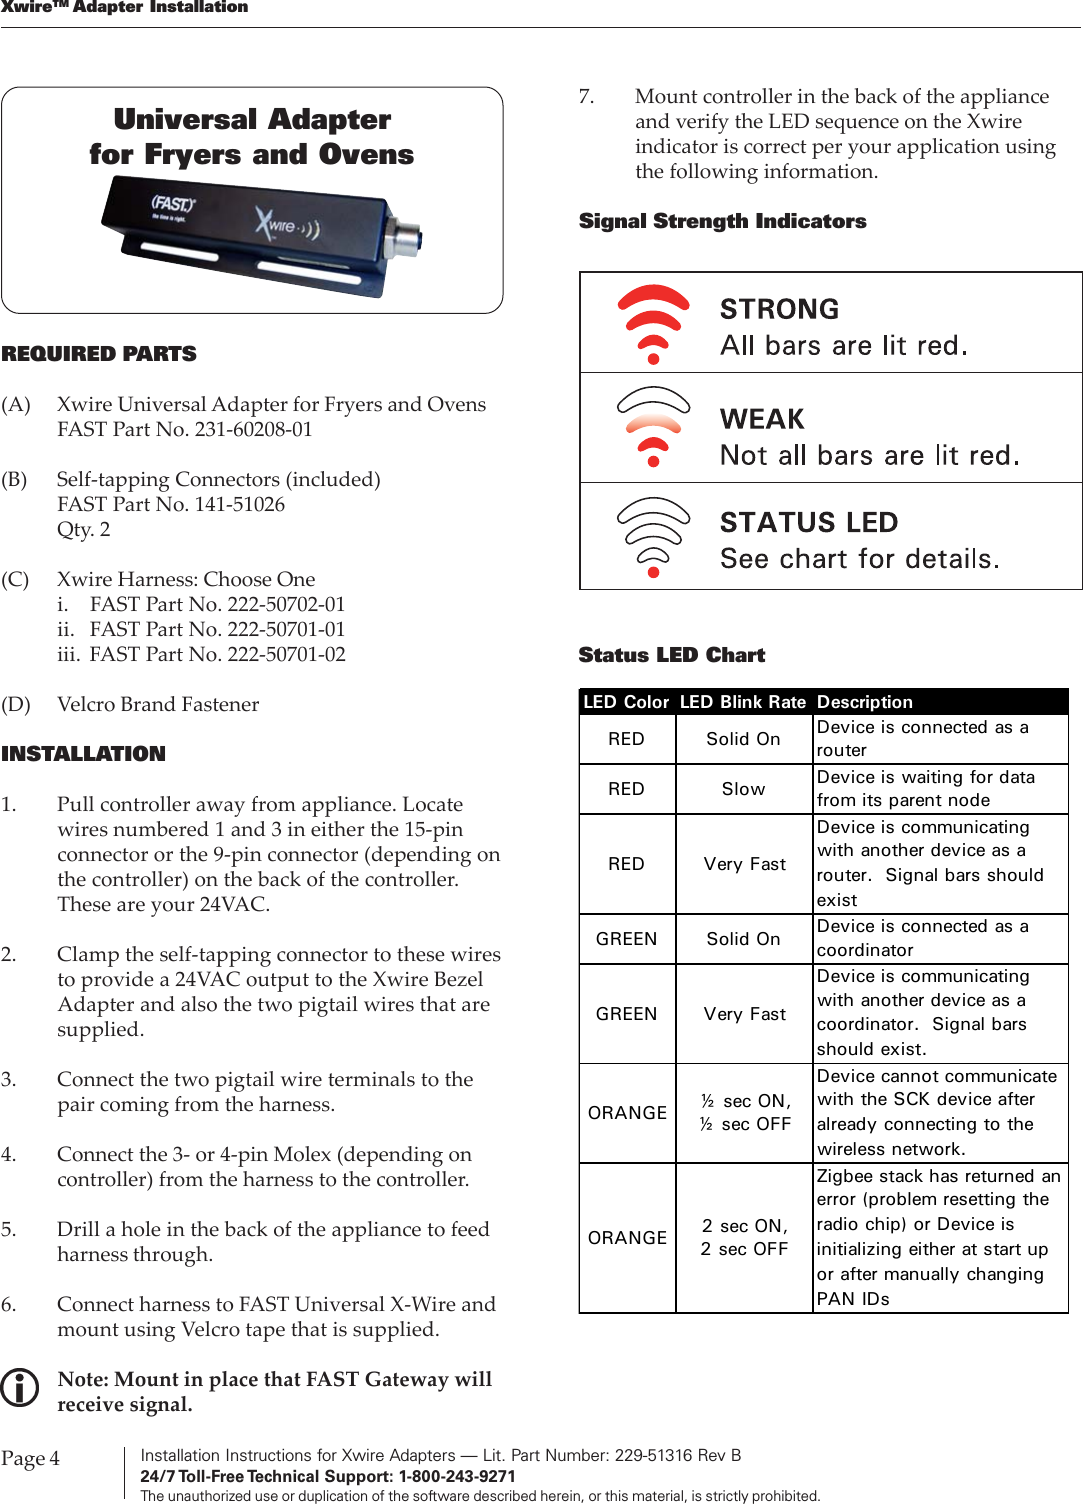 Installation Instructions for Xwire Adapters — Lit. Part Number: 229-51316 Rev B24/7 Toll-Free Technical  Support:  1-800-243-9271The unauthorized use or duplication of the software described herein, or this material, is strictly prohibited.Page 4XwireTM Adapter InstallationREQUIRED PARTS(A) Xwire Universal Adapter for Fryers and OvensFAST Part No. 231-60208-01(B) Self-tapping Connectors (included)FAST Part No. 141-51026Qty. 2(C) Xwire Harness: Choose Onei. FAST Part No. 222-50702-01ii. FAST Part No. 222-50701-01iii. FAST Part No. 222-50701-02(D) Velcro Brand FastenerINSTALLATION1. Pull controller away from appliance. Locatewires numbered 1 and 3 in either the 15-pinconnector or the 9-pin connector (depending onthe controller) on the back of the controller.These are your 24VAC.2. Clamp the self-tapping connector to these wiresto provide a 24VAC output to the Xwire BezelAdapter and also the two pigtail wires that aresupplied.3. Connect the two pigtail wire terminals to thepair coming from the harness.4. Connect the 3- or 4-pin Molex (depending oncontroller) from the harness to the controller.5. Drill a hole in the back of the appliance to feedharness through.6. Connect harness to FAST Universal X-Wire andmount using Velcro tape that is supplied.Note: Mount in place that FAST Gateway willreceive signal.7. Mount controller in the back of the applianceand verify the LED sequence on the Xwireindicator is correct per your application usingthe following information.Signal Strength IndicatorsStatus LED ChartUniversal Adapterfor Fryers and OvensLED Color LED Blink Rate DescriptionRED Solid On Device is connected as a routerRED Slow  Device is waiting for data from its parent nodeRED Very FastDevice is communicating with another device as a router. Signal bars should existGREEN Solid On Device is connected as a coordinatorGREEN Very FastDevice is communicating with another device as a coordinator. Signal bars should exist.ORANGE ½ sec ON, ½ sec OFFDevice cannot communicate with the SCK device after already connecting to the wireless network.ORANGE 2 sec ON, 2 sec OFFZigbee stack has returned an error (problem resetting the radio chip) or Device is initializing either at start up or after manually changing PAN IDs